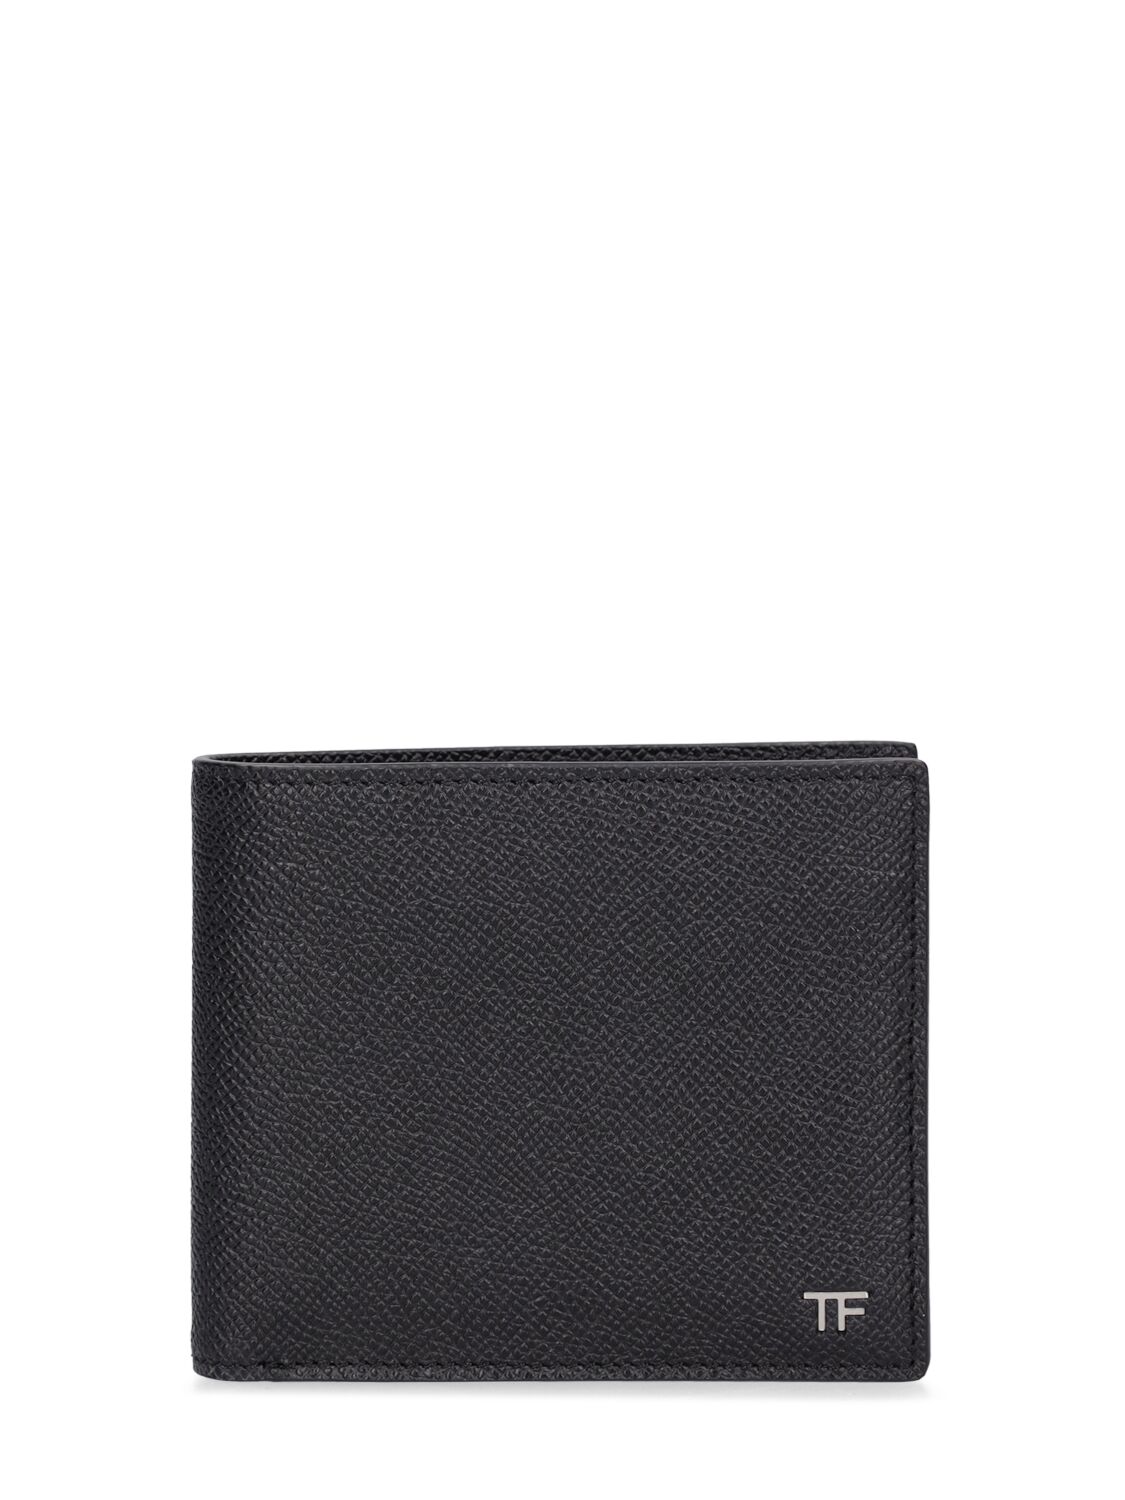 Tom Ford Saffiano Leather Bifold Wallet In Black